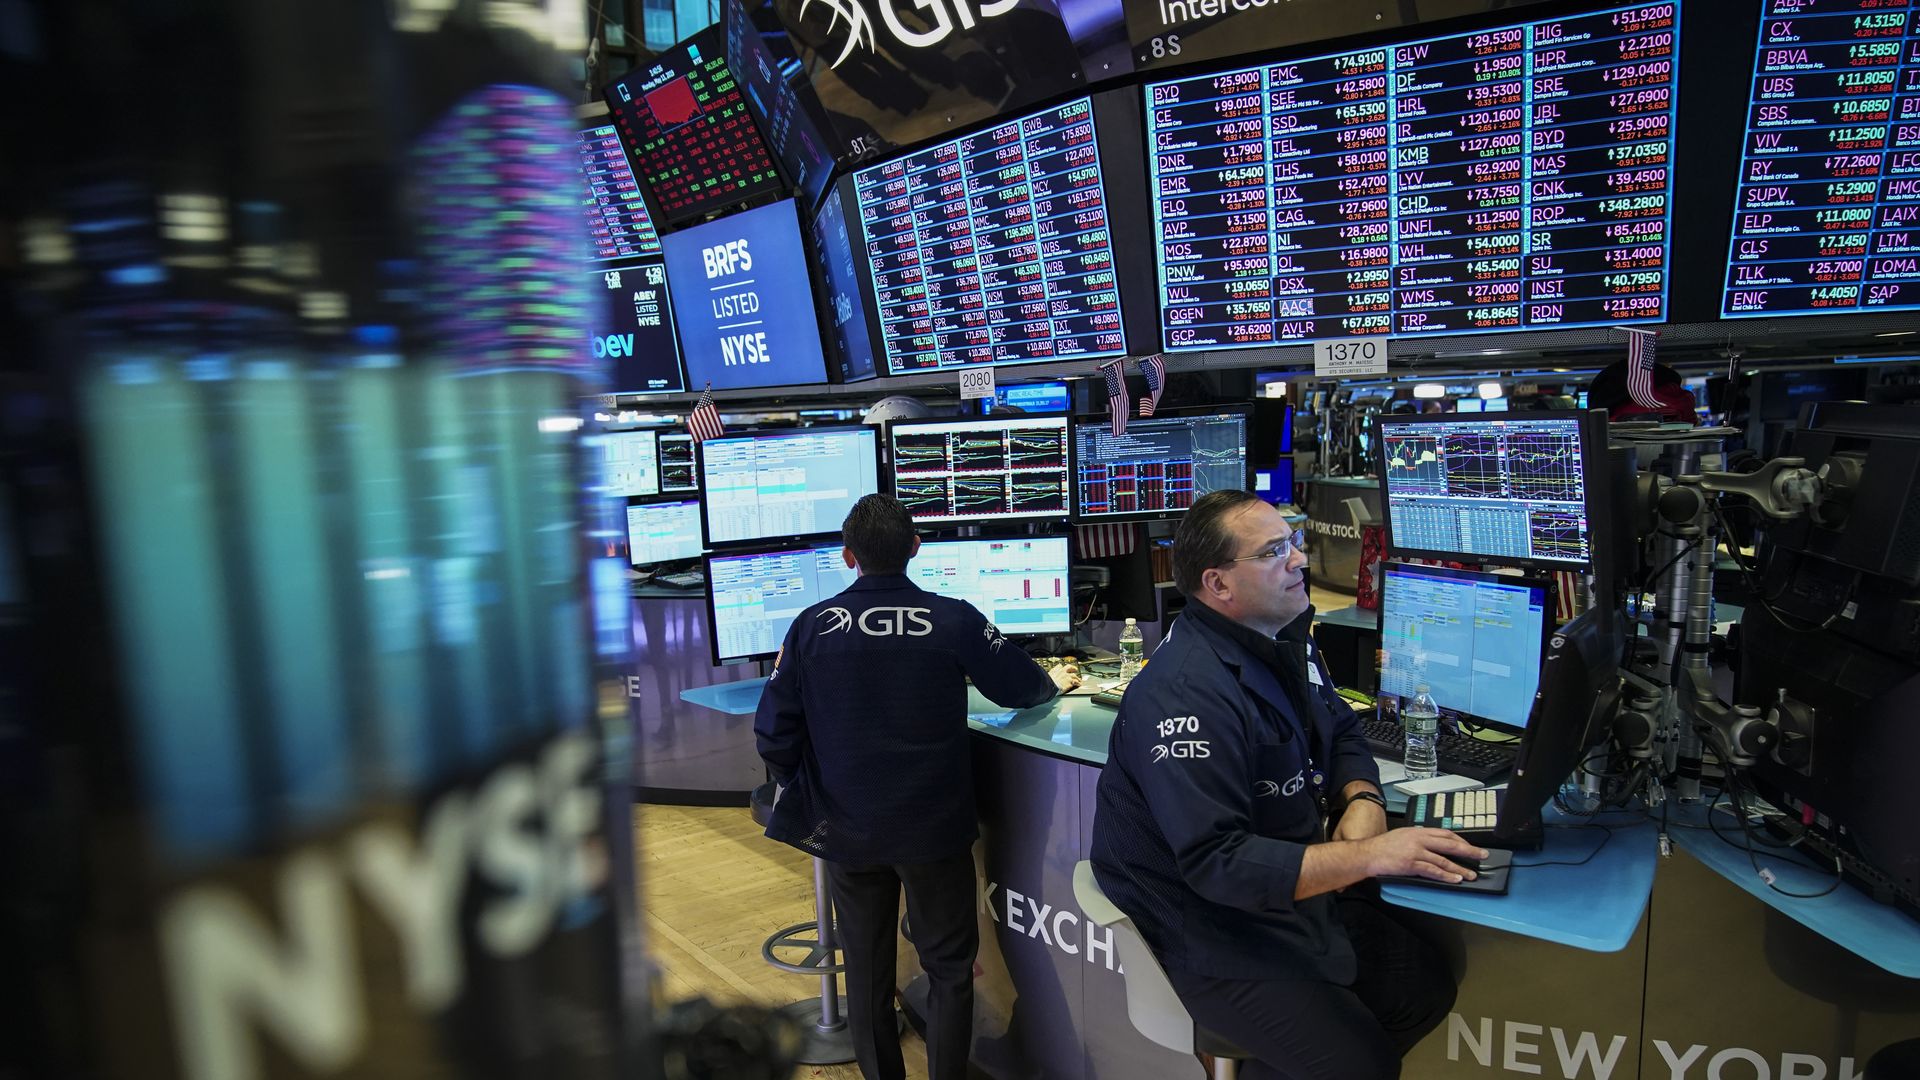 Stock traders sit at desks with screens of company stock tickers overhead.